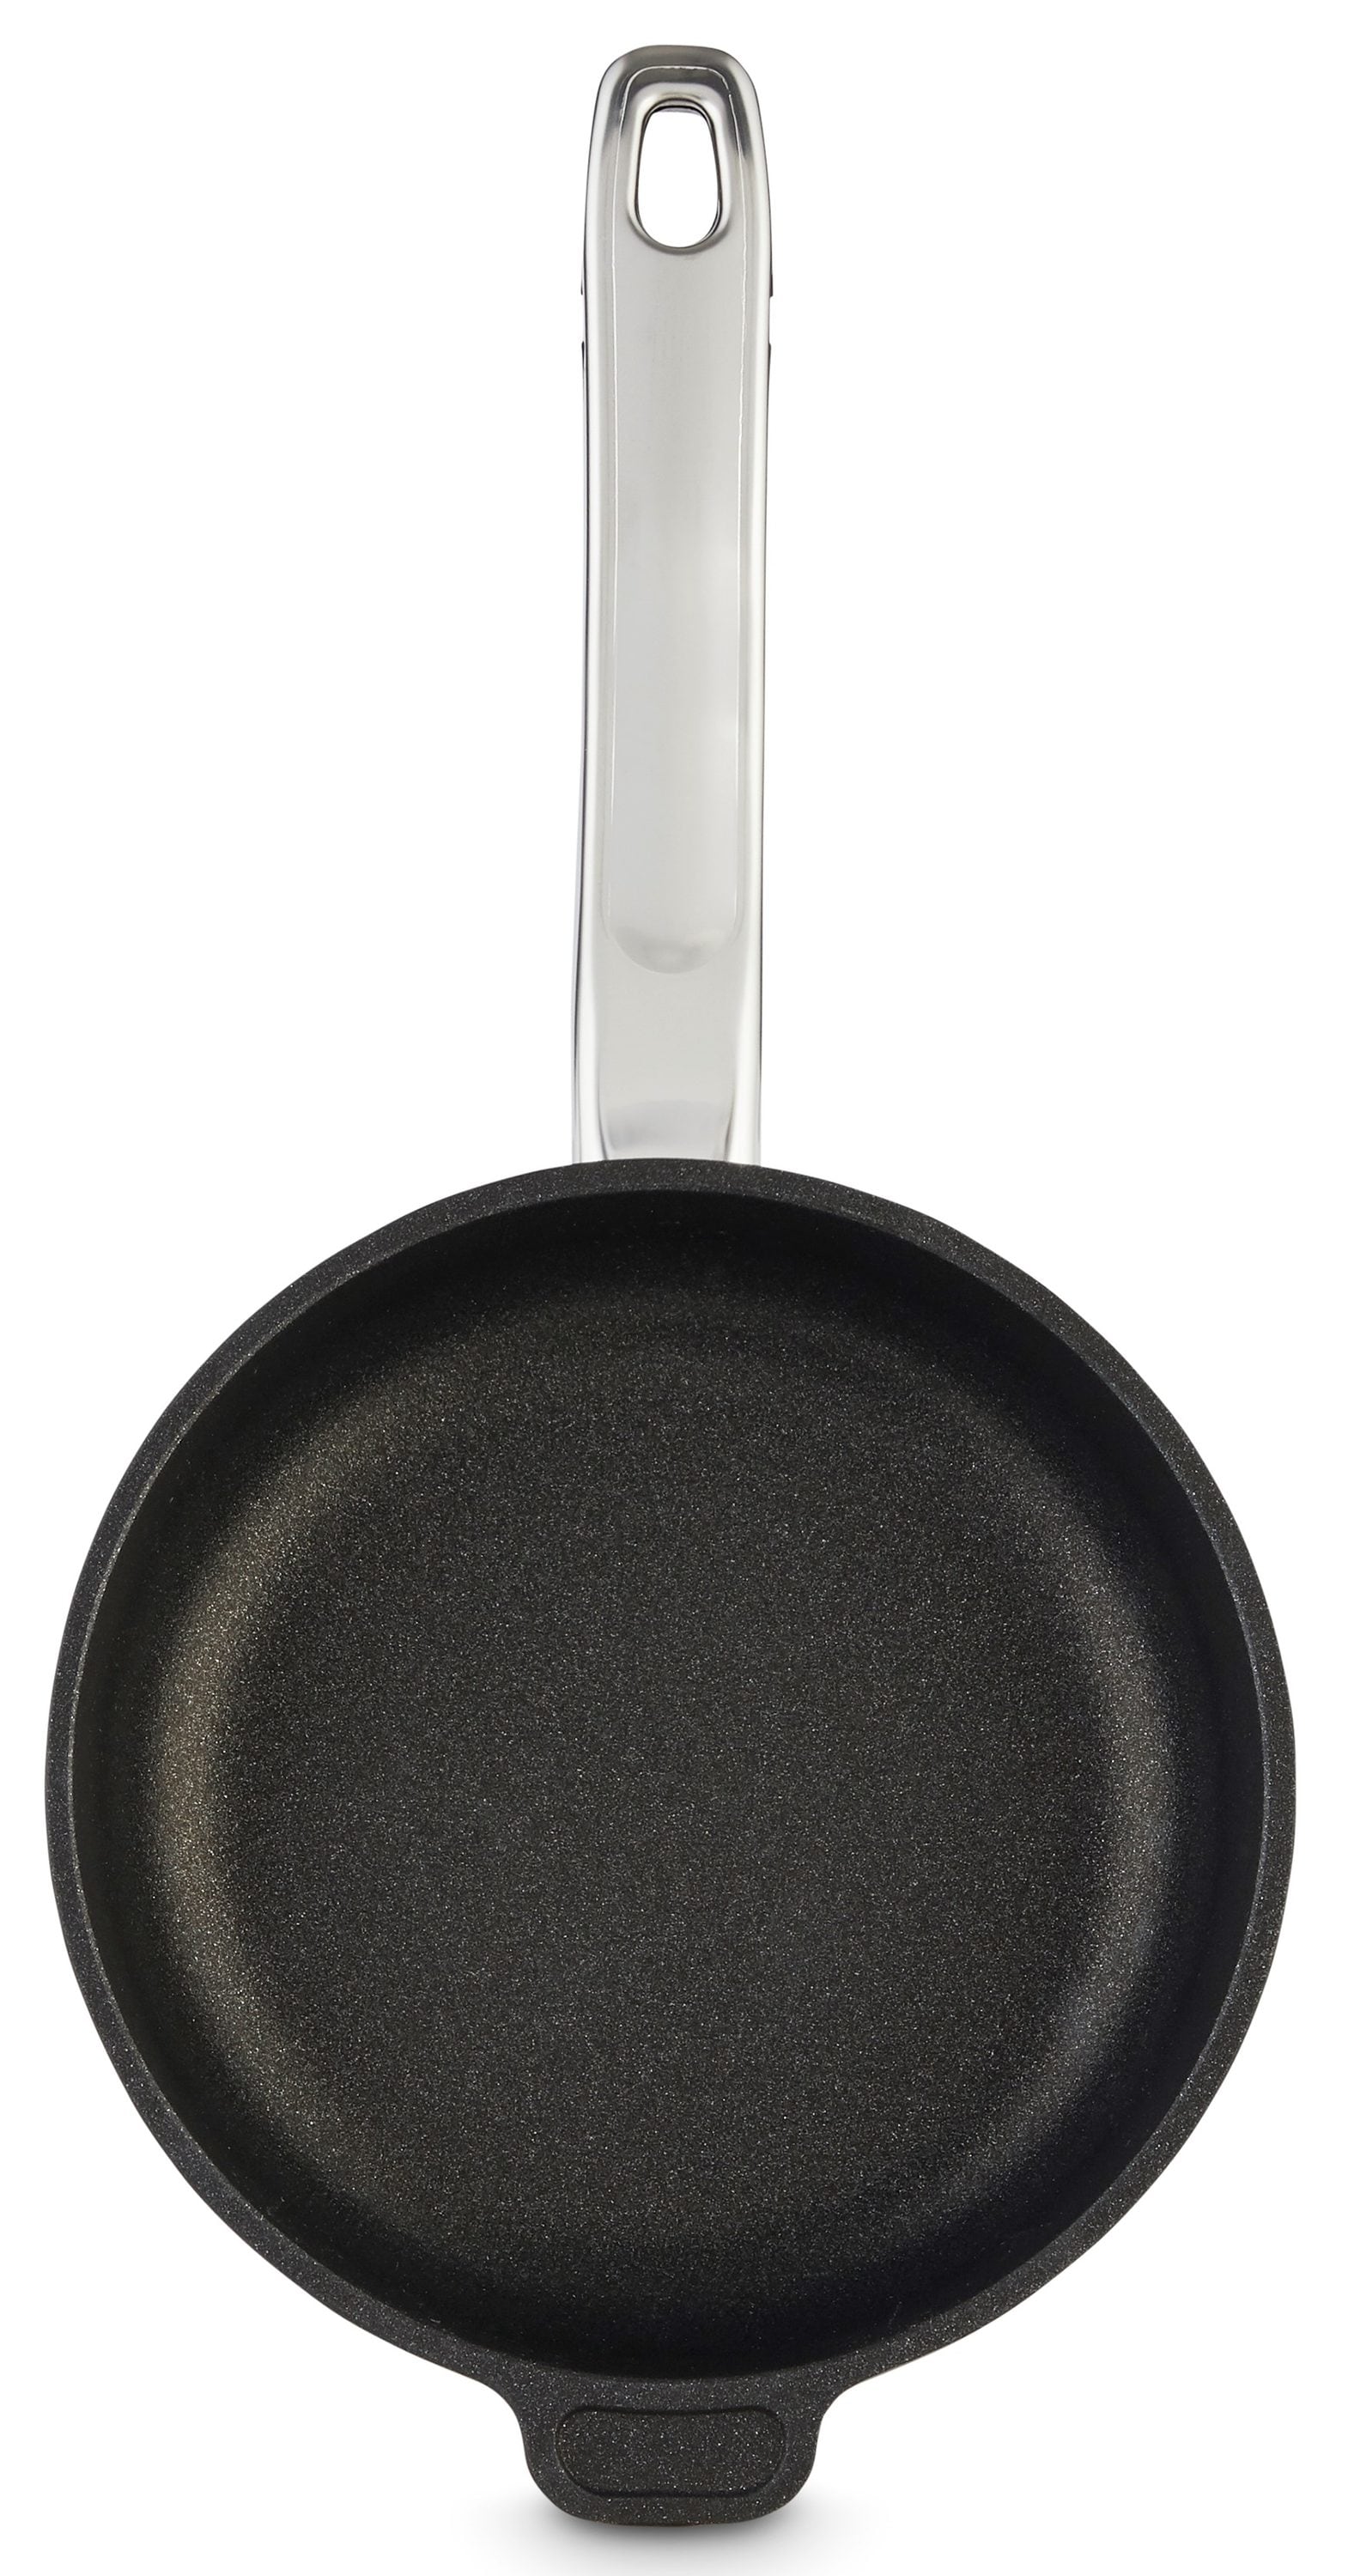 Ozeri Professional Series Stainless Steel Frying Pan by , 100